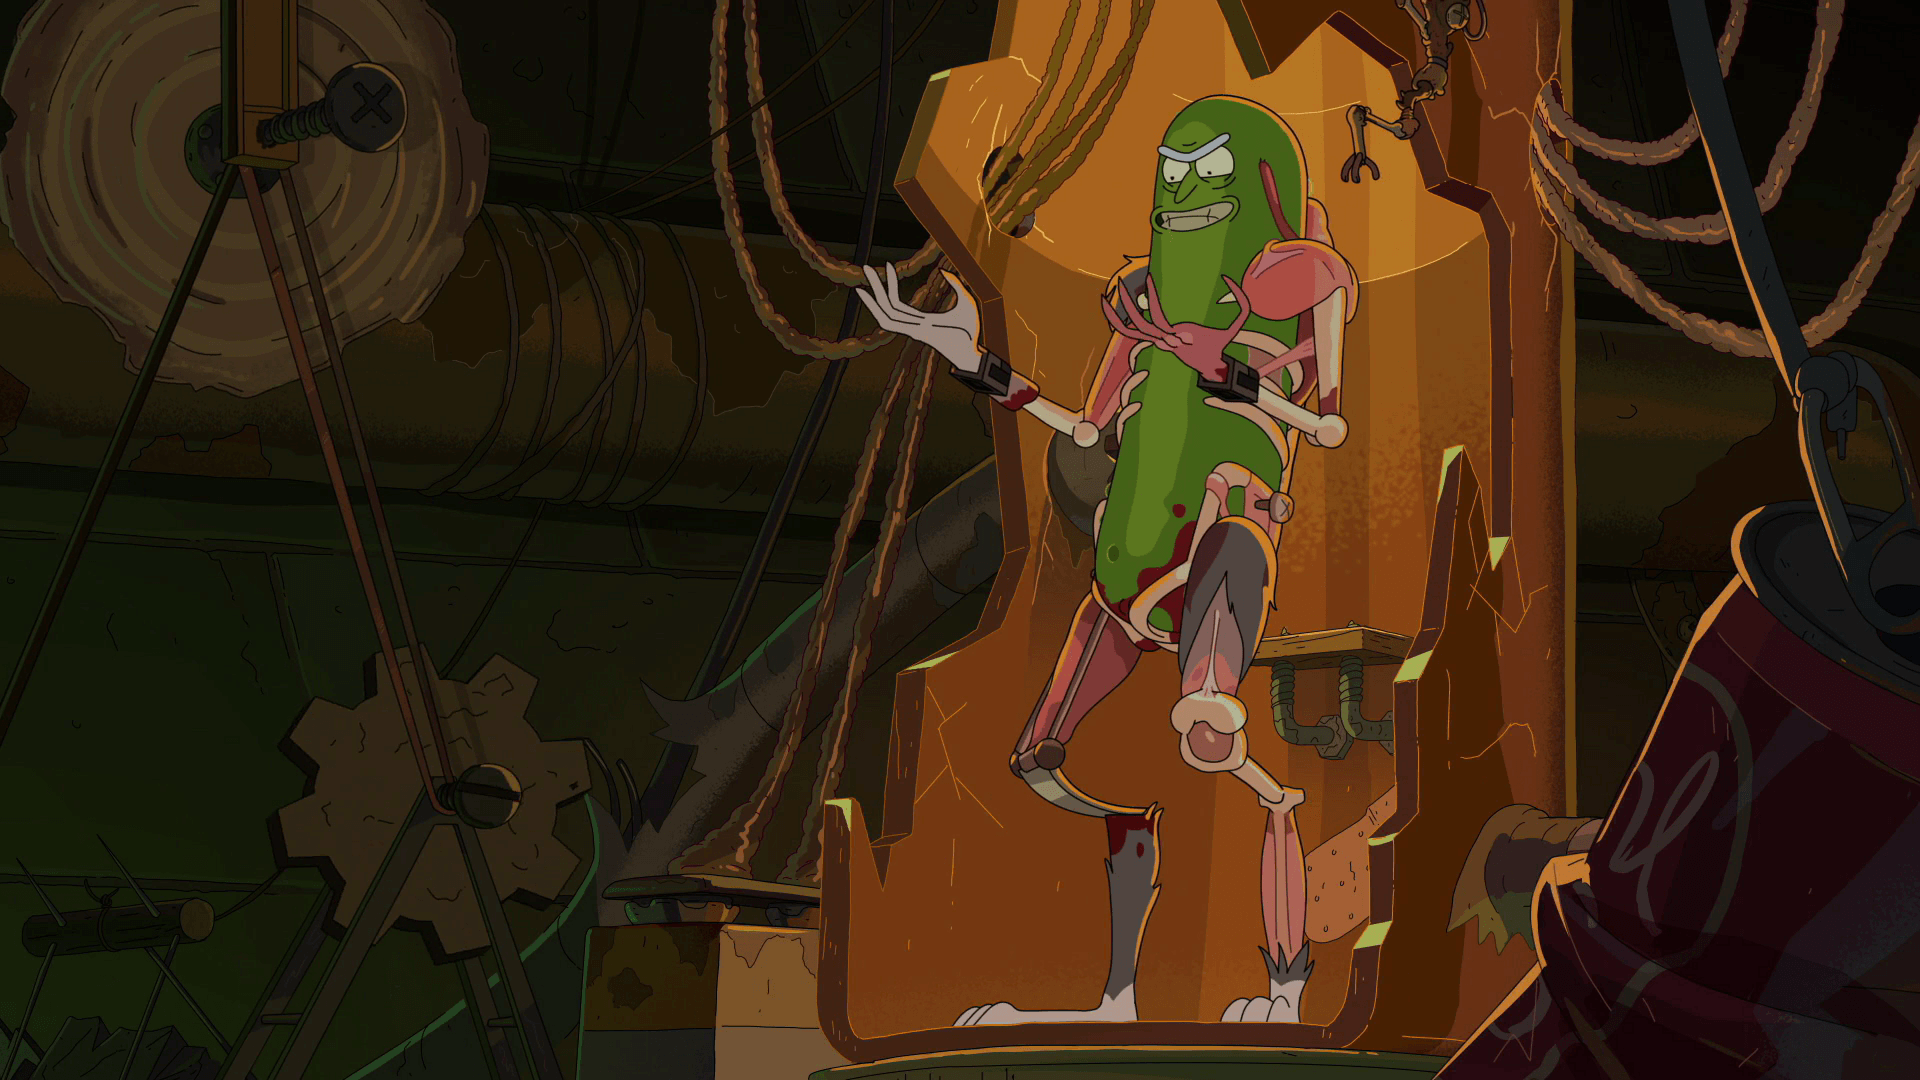 Pickle Rick wallpaper for PC